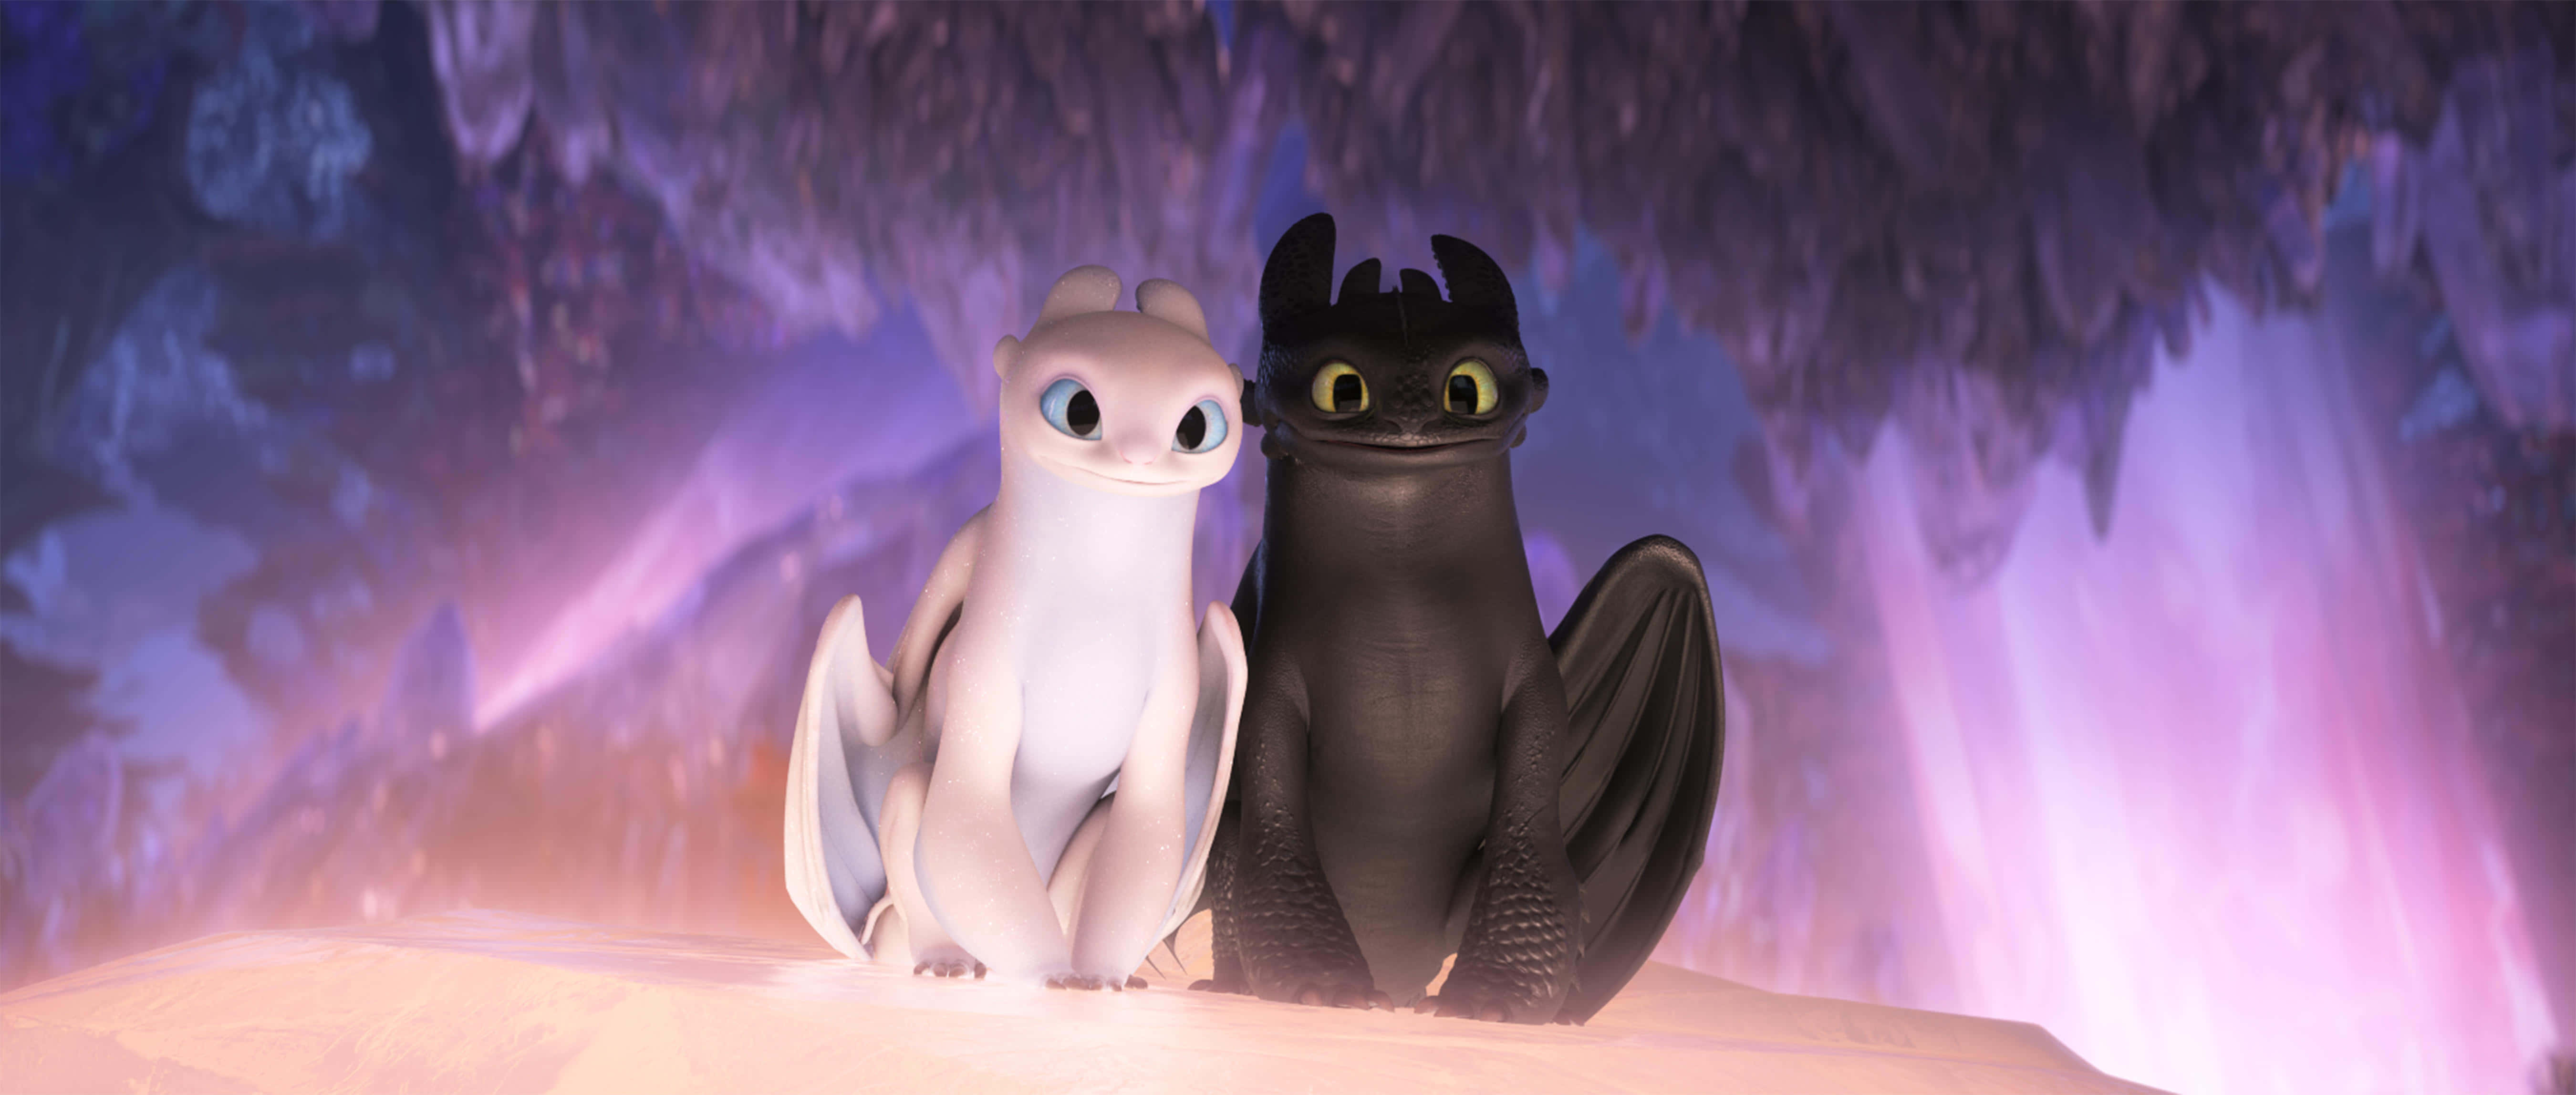 Grab your popcorn and get ready to soar with the heroic dragons from How to Train Your Dragon! Wallpaper